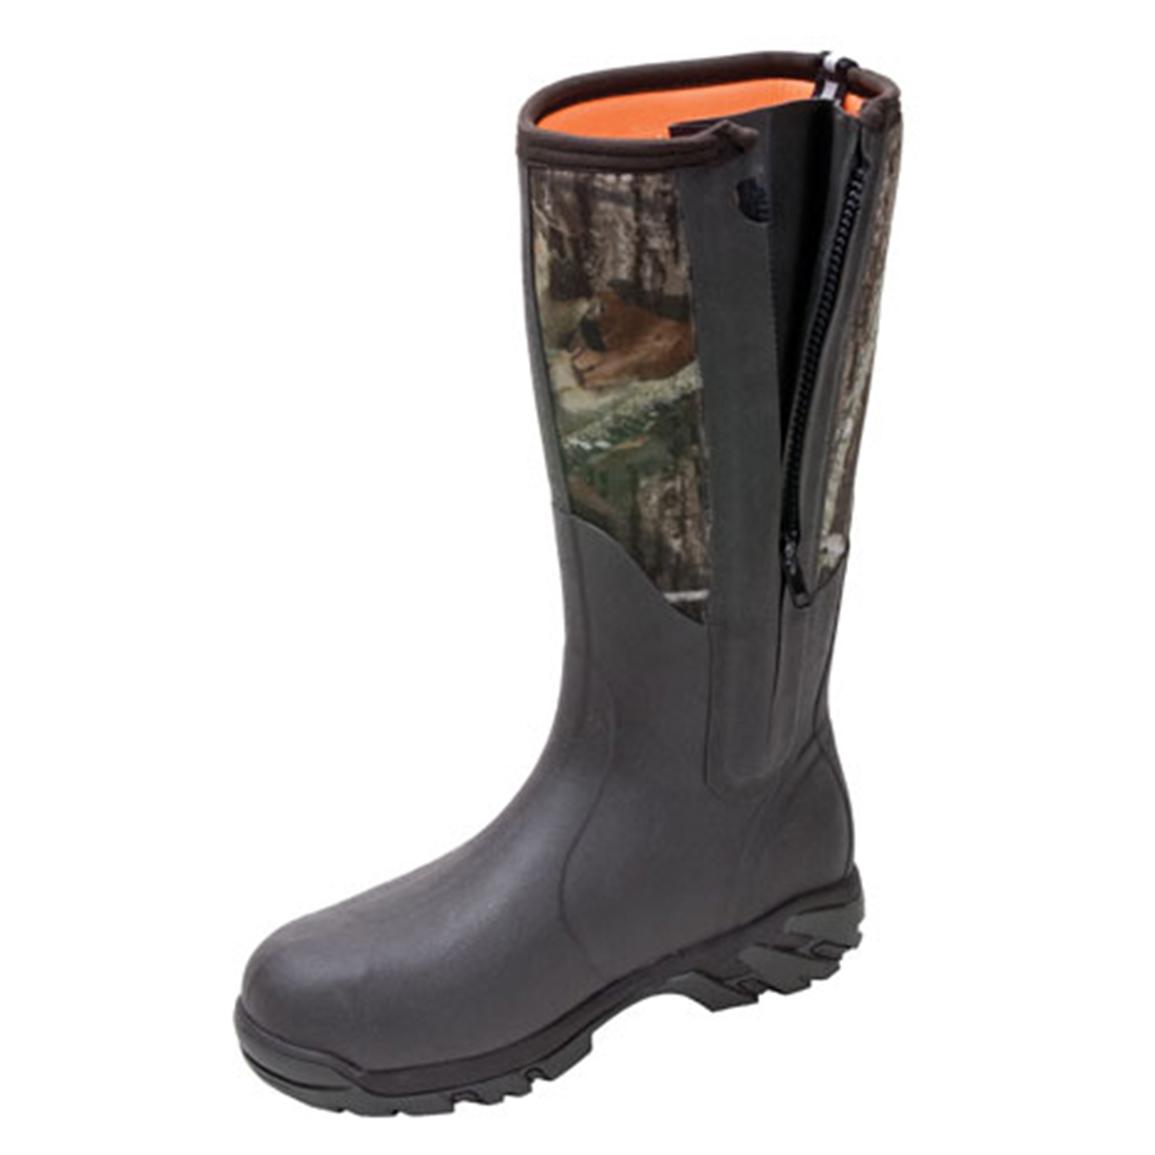 zip up rubber boots